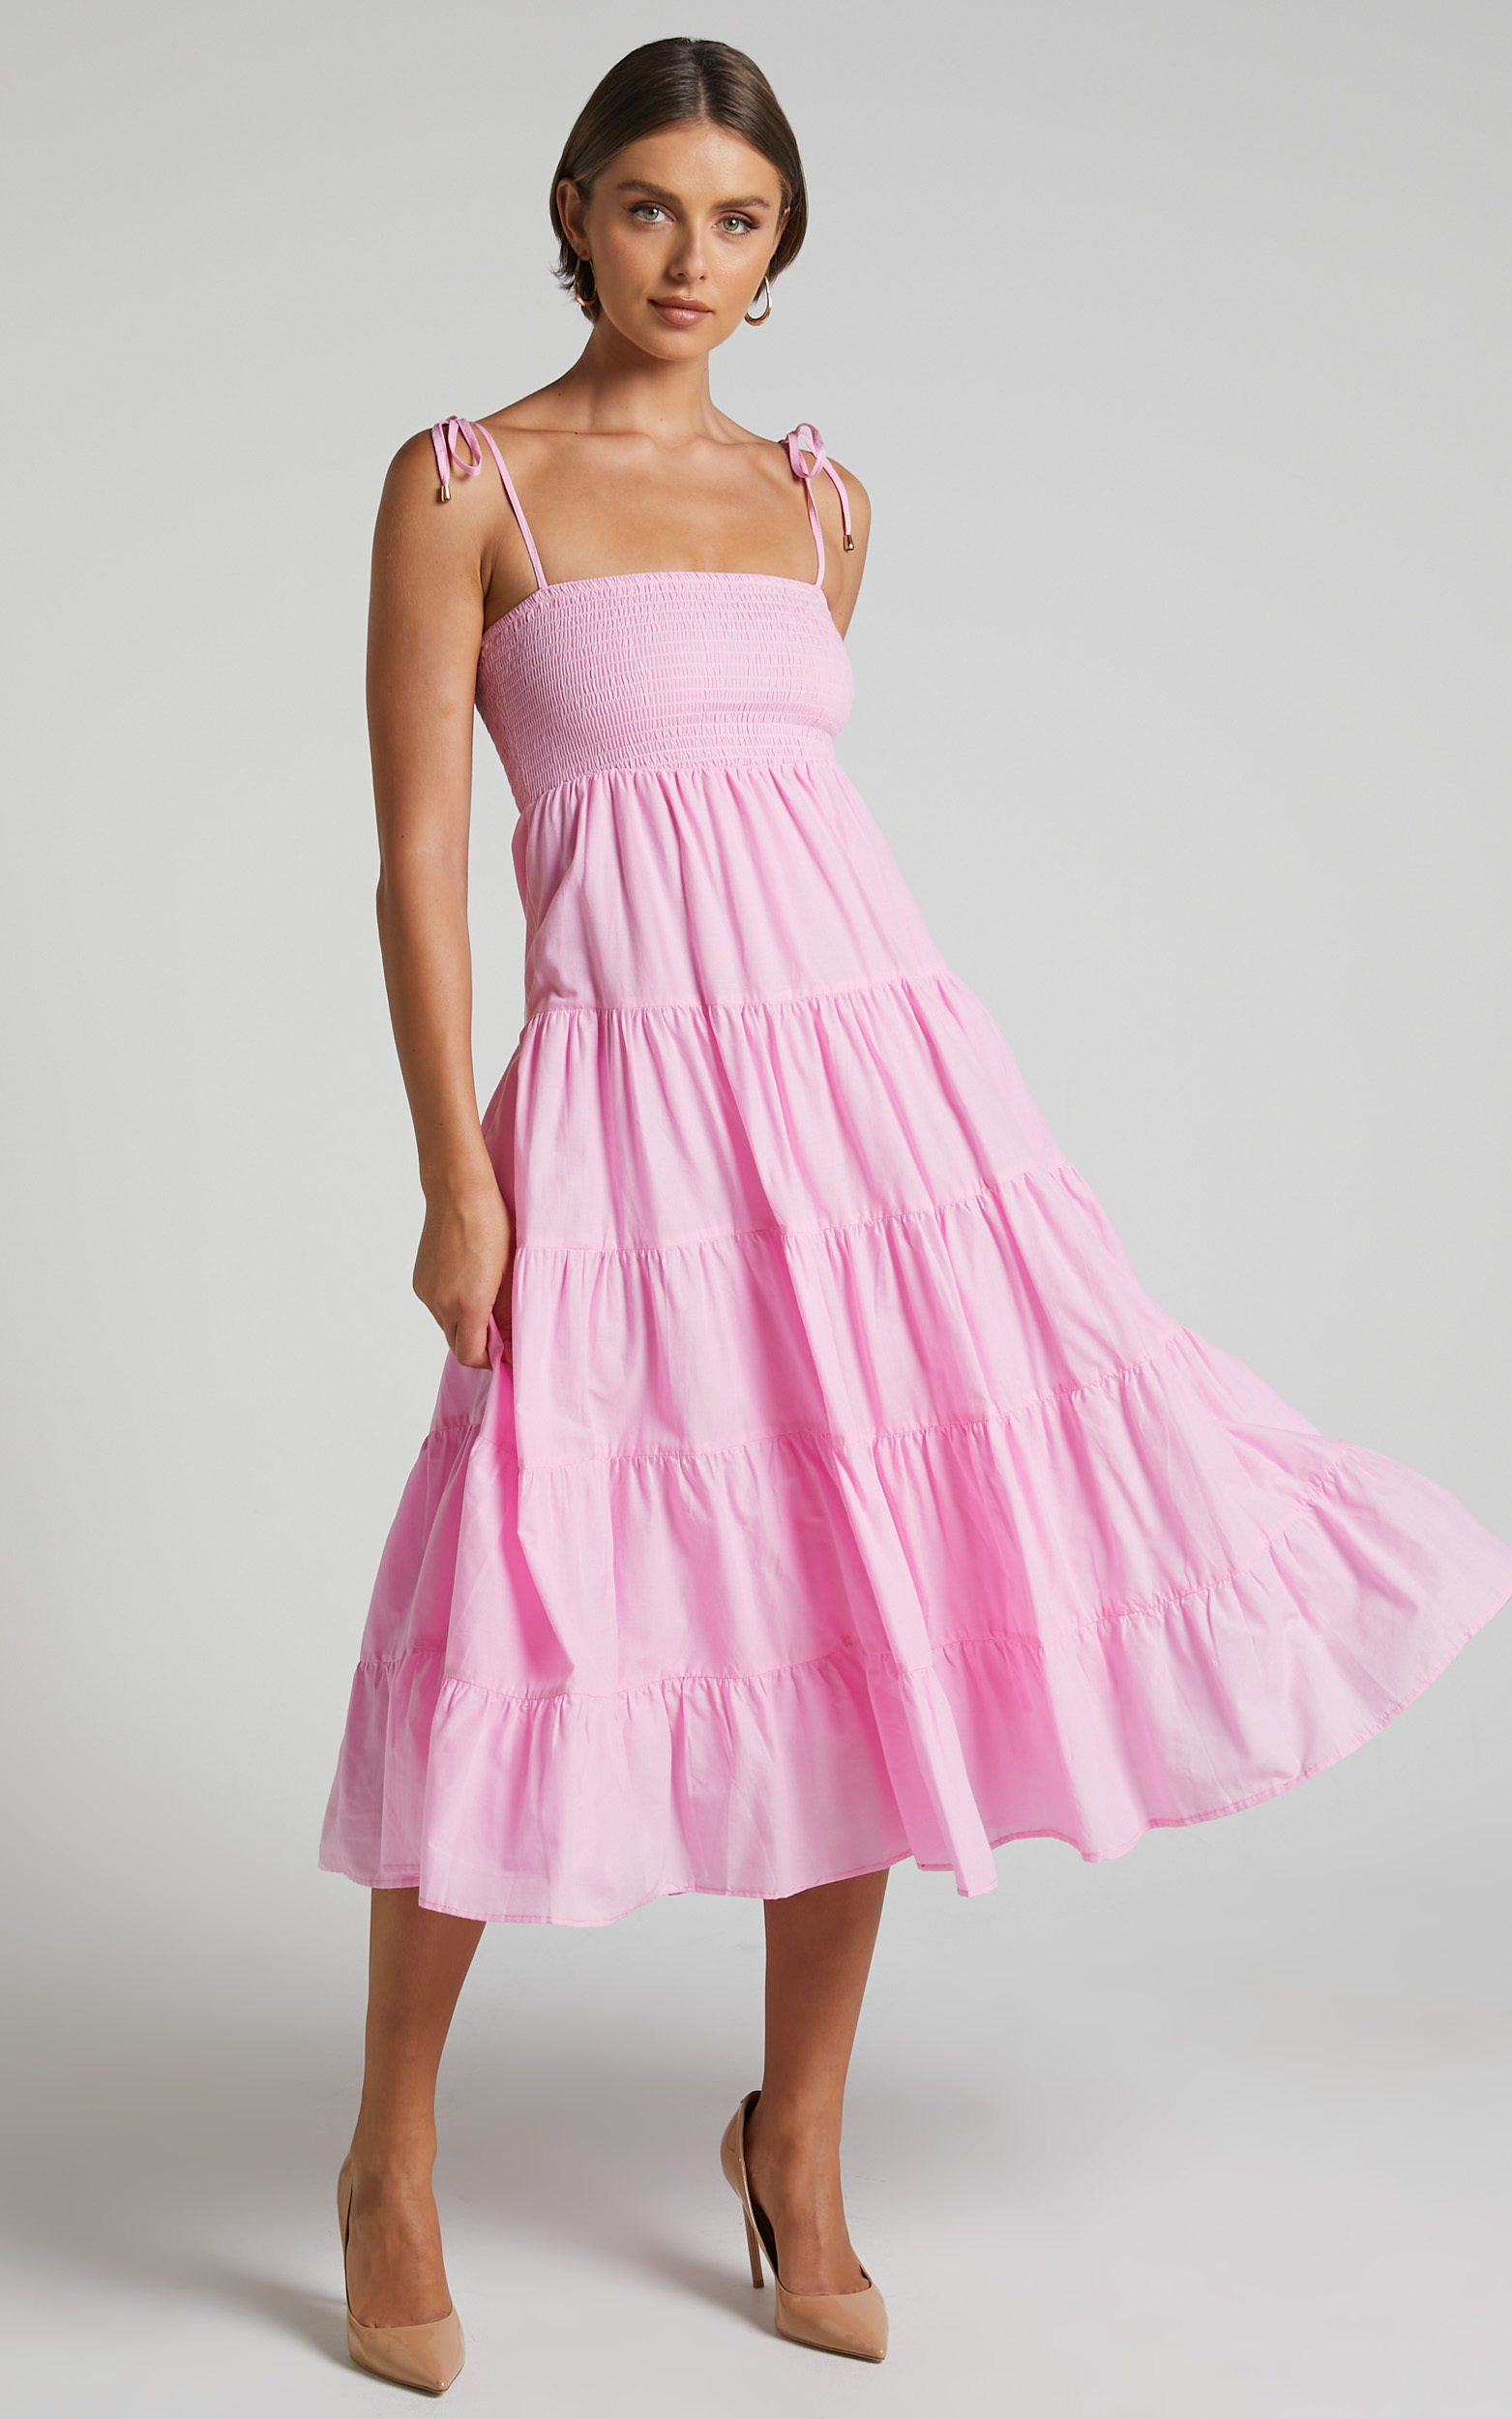 Ayla Midi Dress - Tie Up Strap Tiered Dress in Candy Pink - 06, PNK2, hi-res image number null